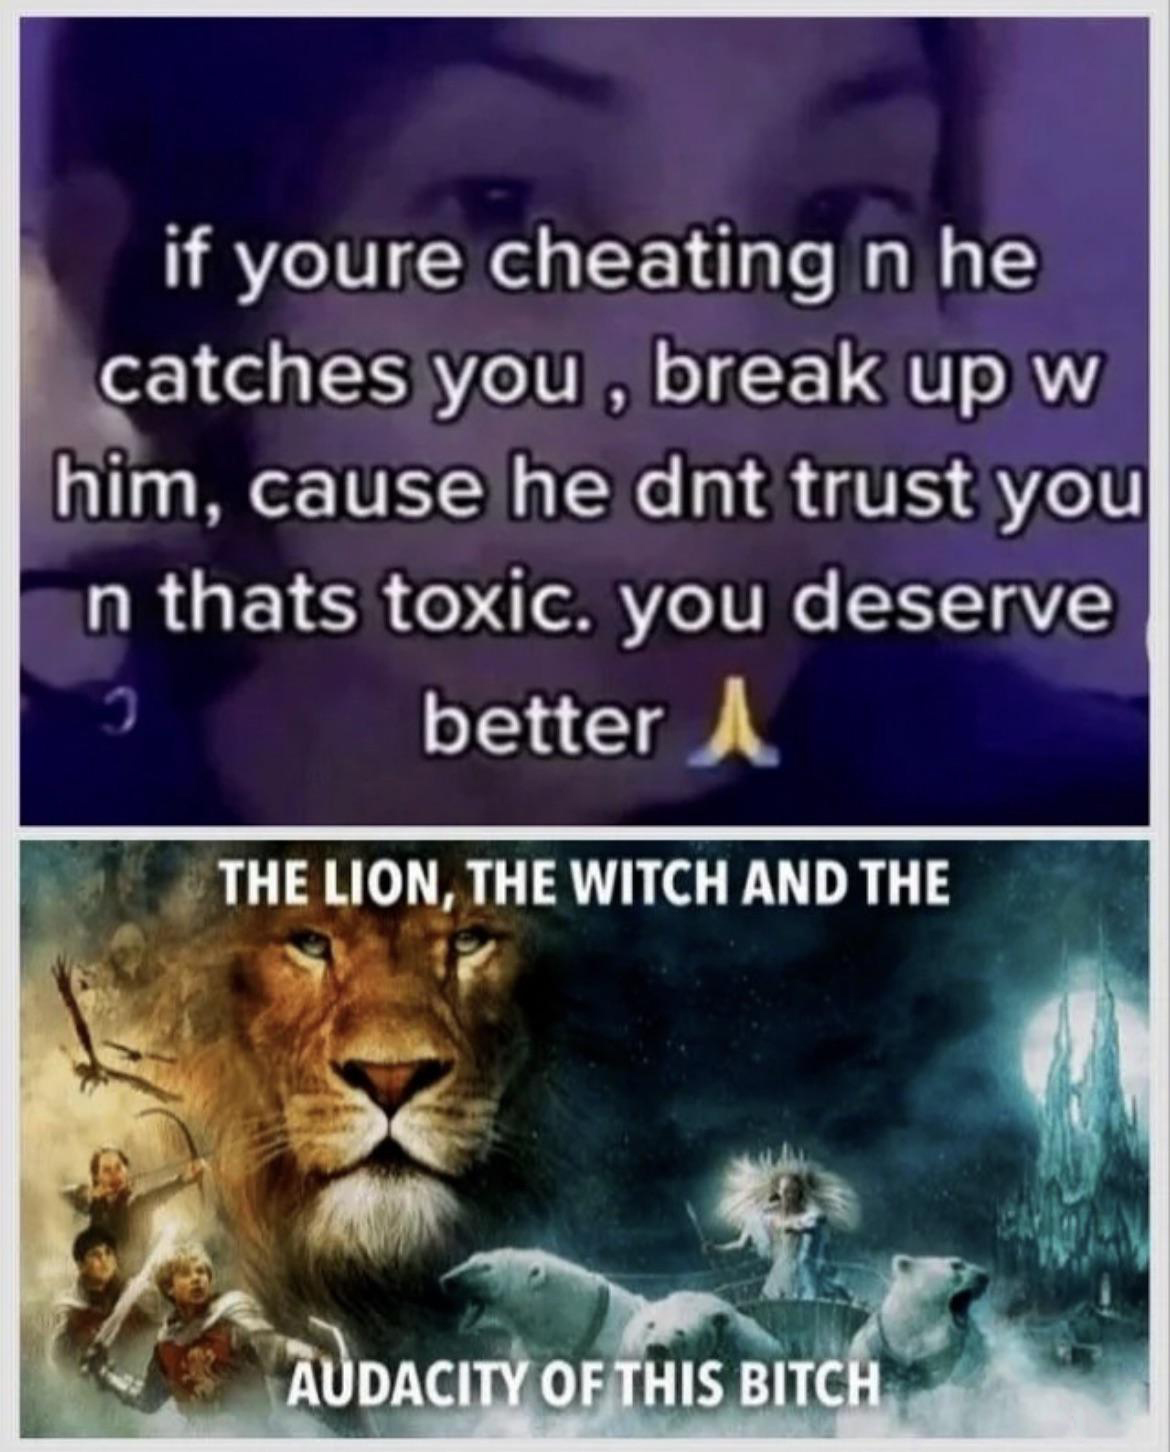 dank memes and pics - fauna - if youre cheating n he catches you, break up w him, cause he dnt trust you n thats toxic. you deserve better The Lion, The Witch And The Audacity Of This Bitch